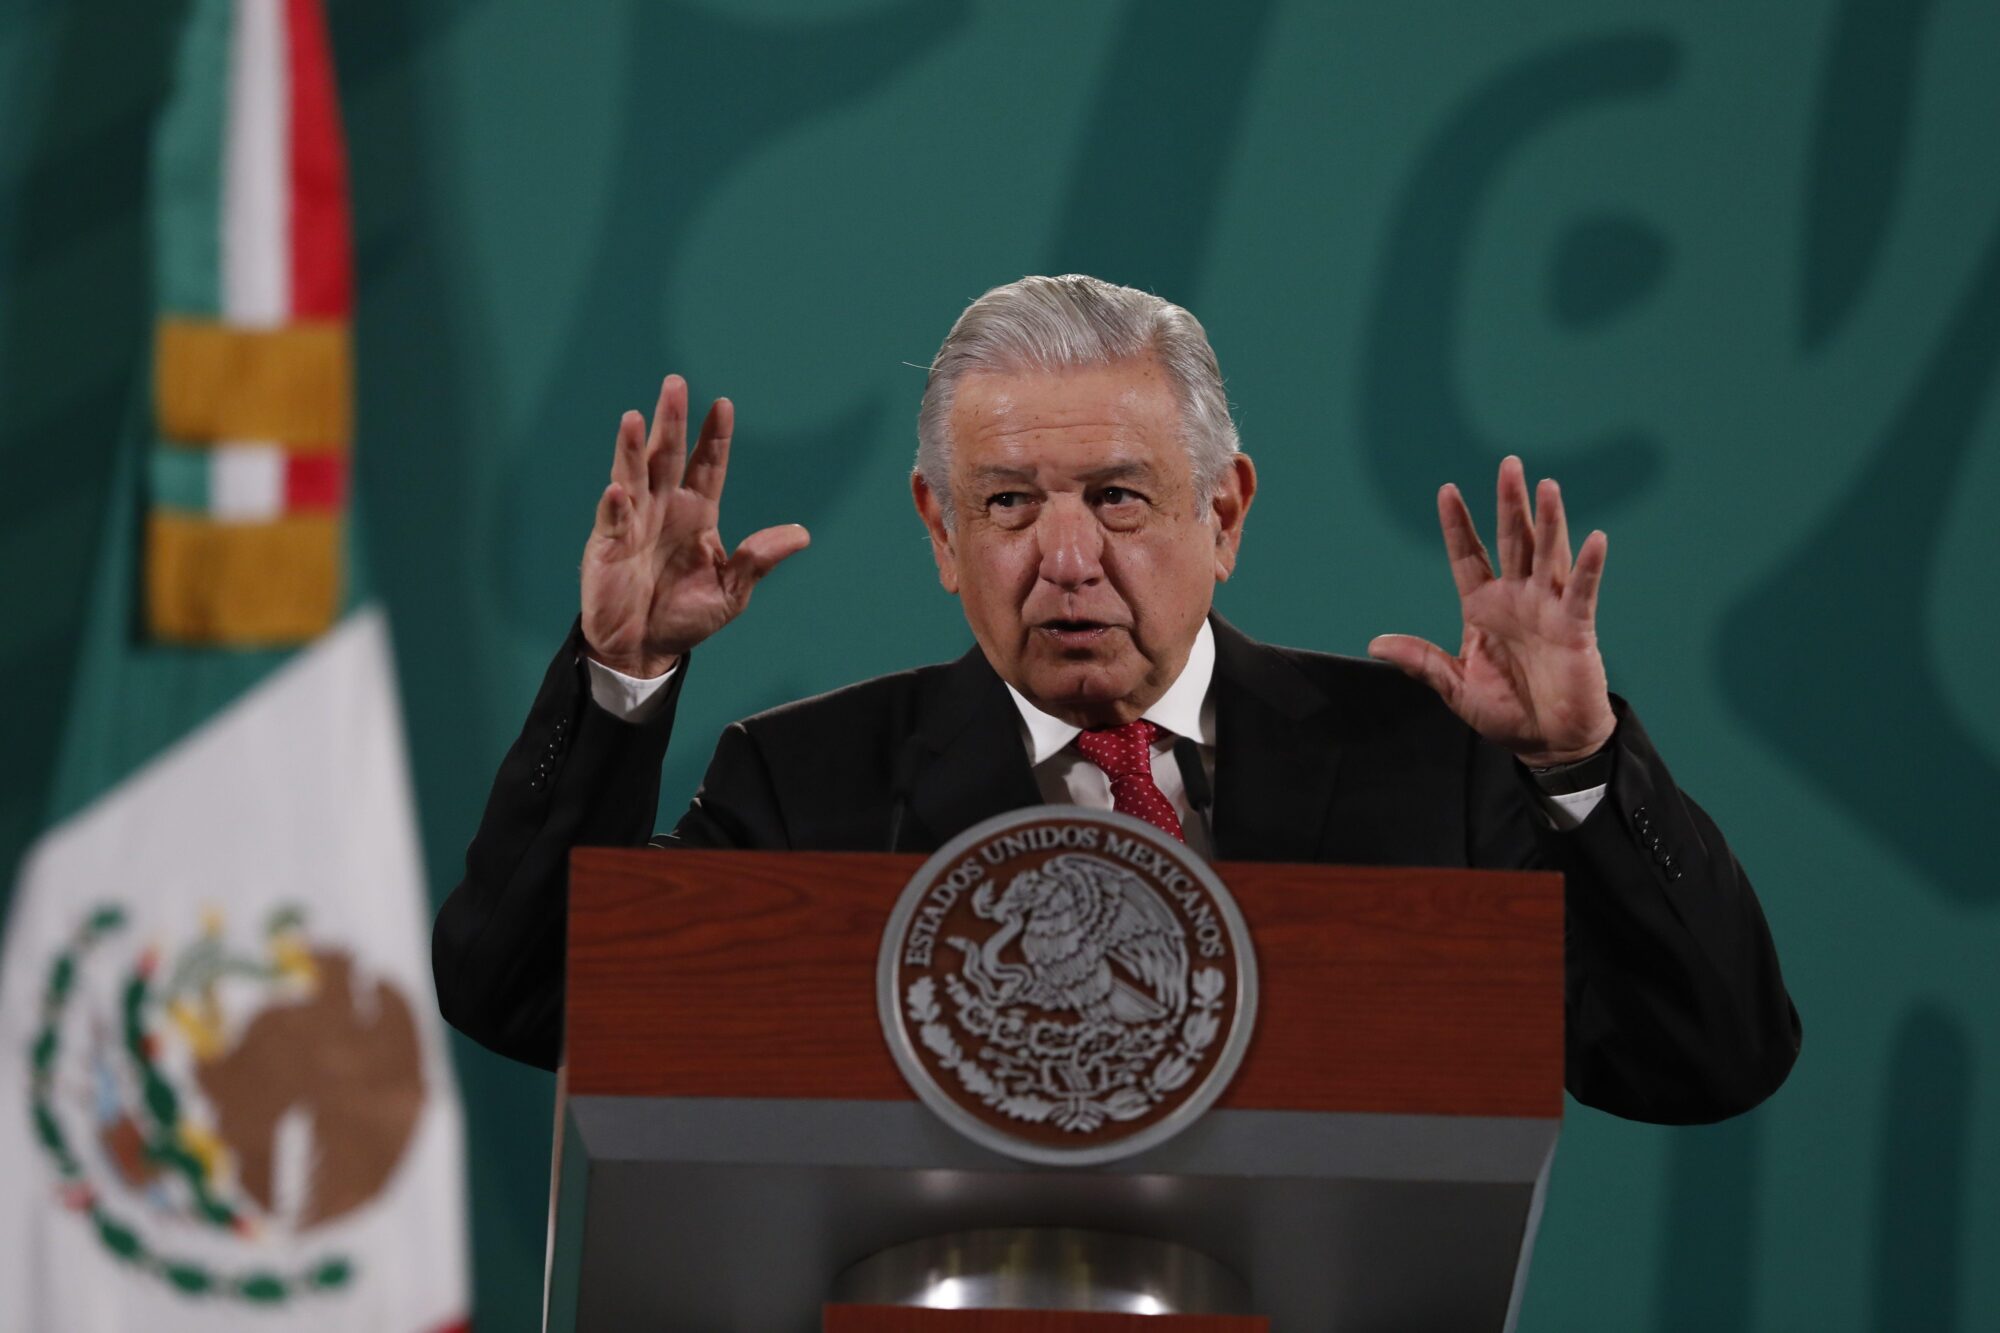 <p>Mexican president Andrés Manuel López Obrador defends his proposed electricity reform at a press conference this November. New rules would prohibit further concessions on lithium exploitation and give the government more control over the resource. (Image: Mario Guzman, EFE / Alamy)</p>